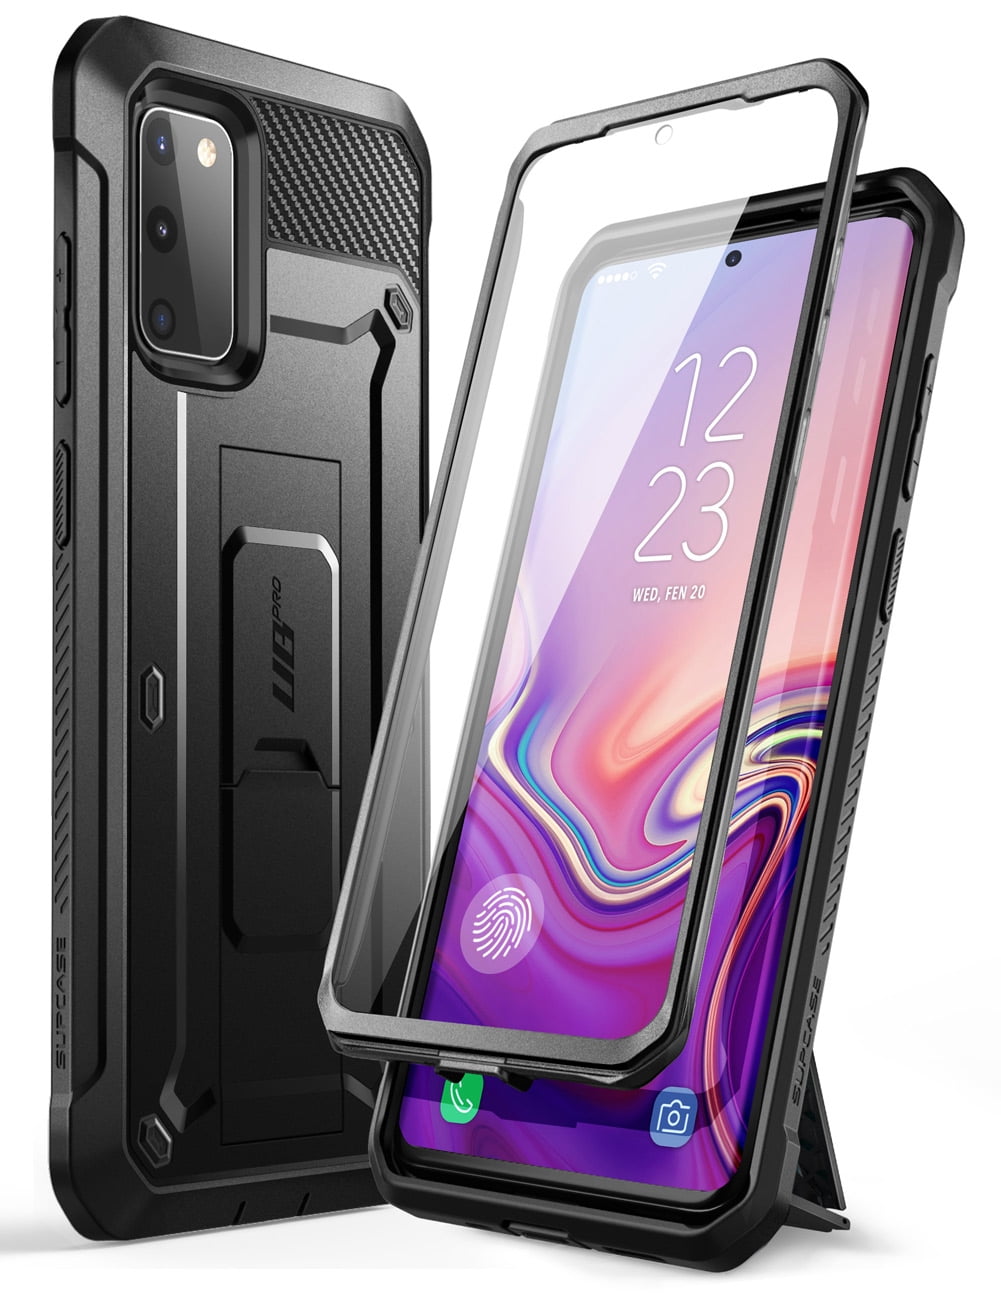 Black SUPCASE Unicorn Beetle Pro Series Case Designed for LG V60 ThinQ 2020 Release ,Full-Body Rugged Holster & Kickstand Case with Built-in Screen Protector